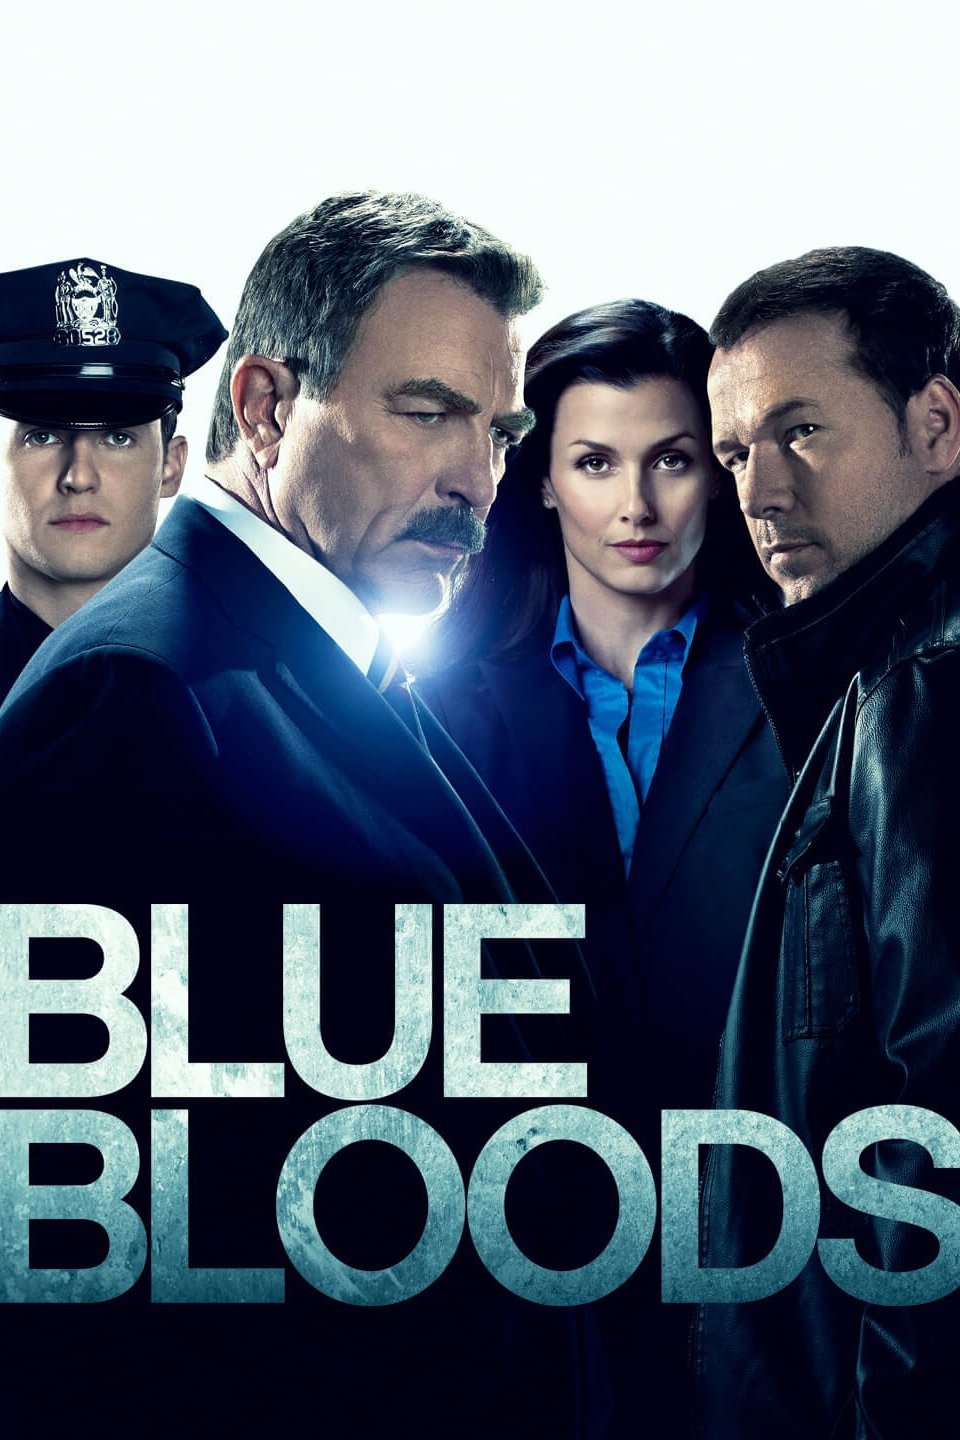 Blue Bloods Season 7 Episode 9 | tvgratis - Where Can I Watch Blue Bloods For Free